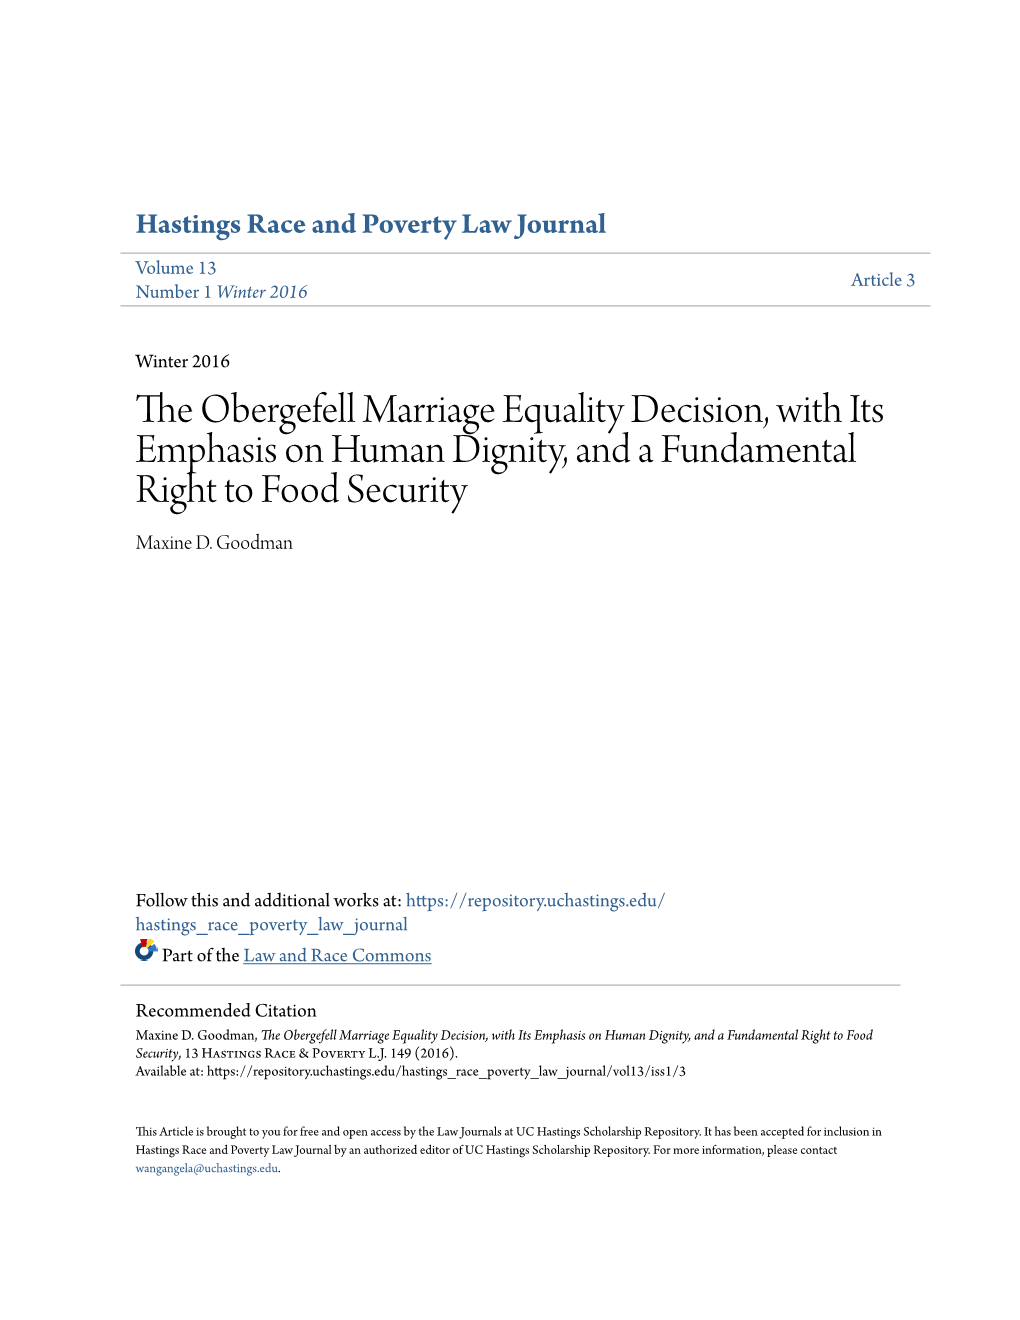 The Obergefell Marriage Equality Decision, with Its Emphasis on Human Dignity, and a Fundamental Right to Food Security Maxine D